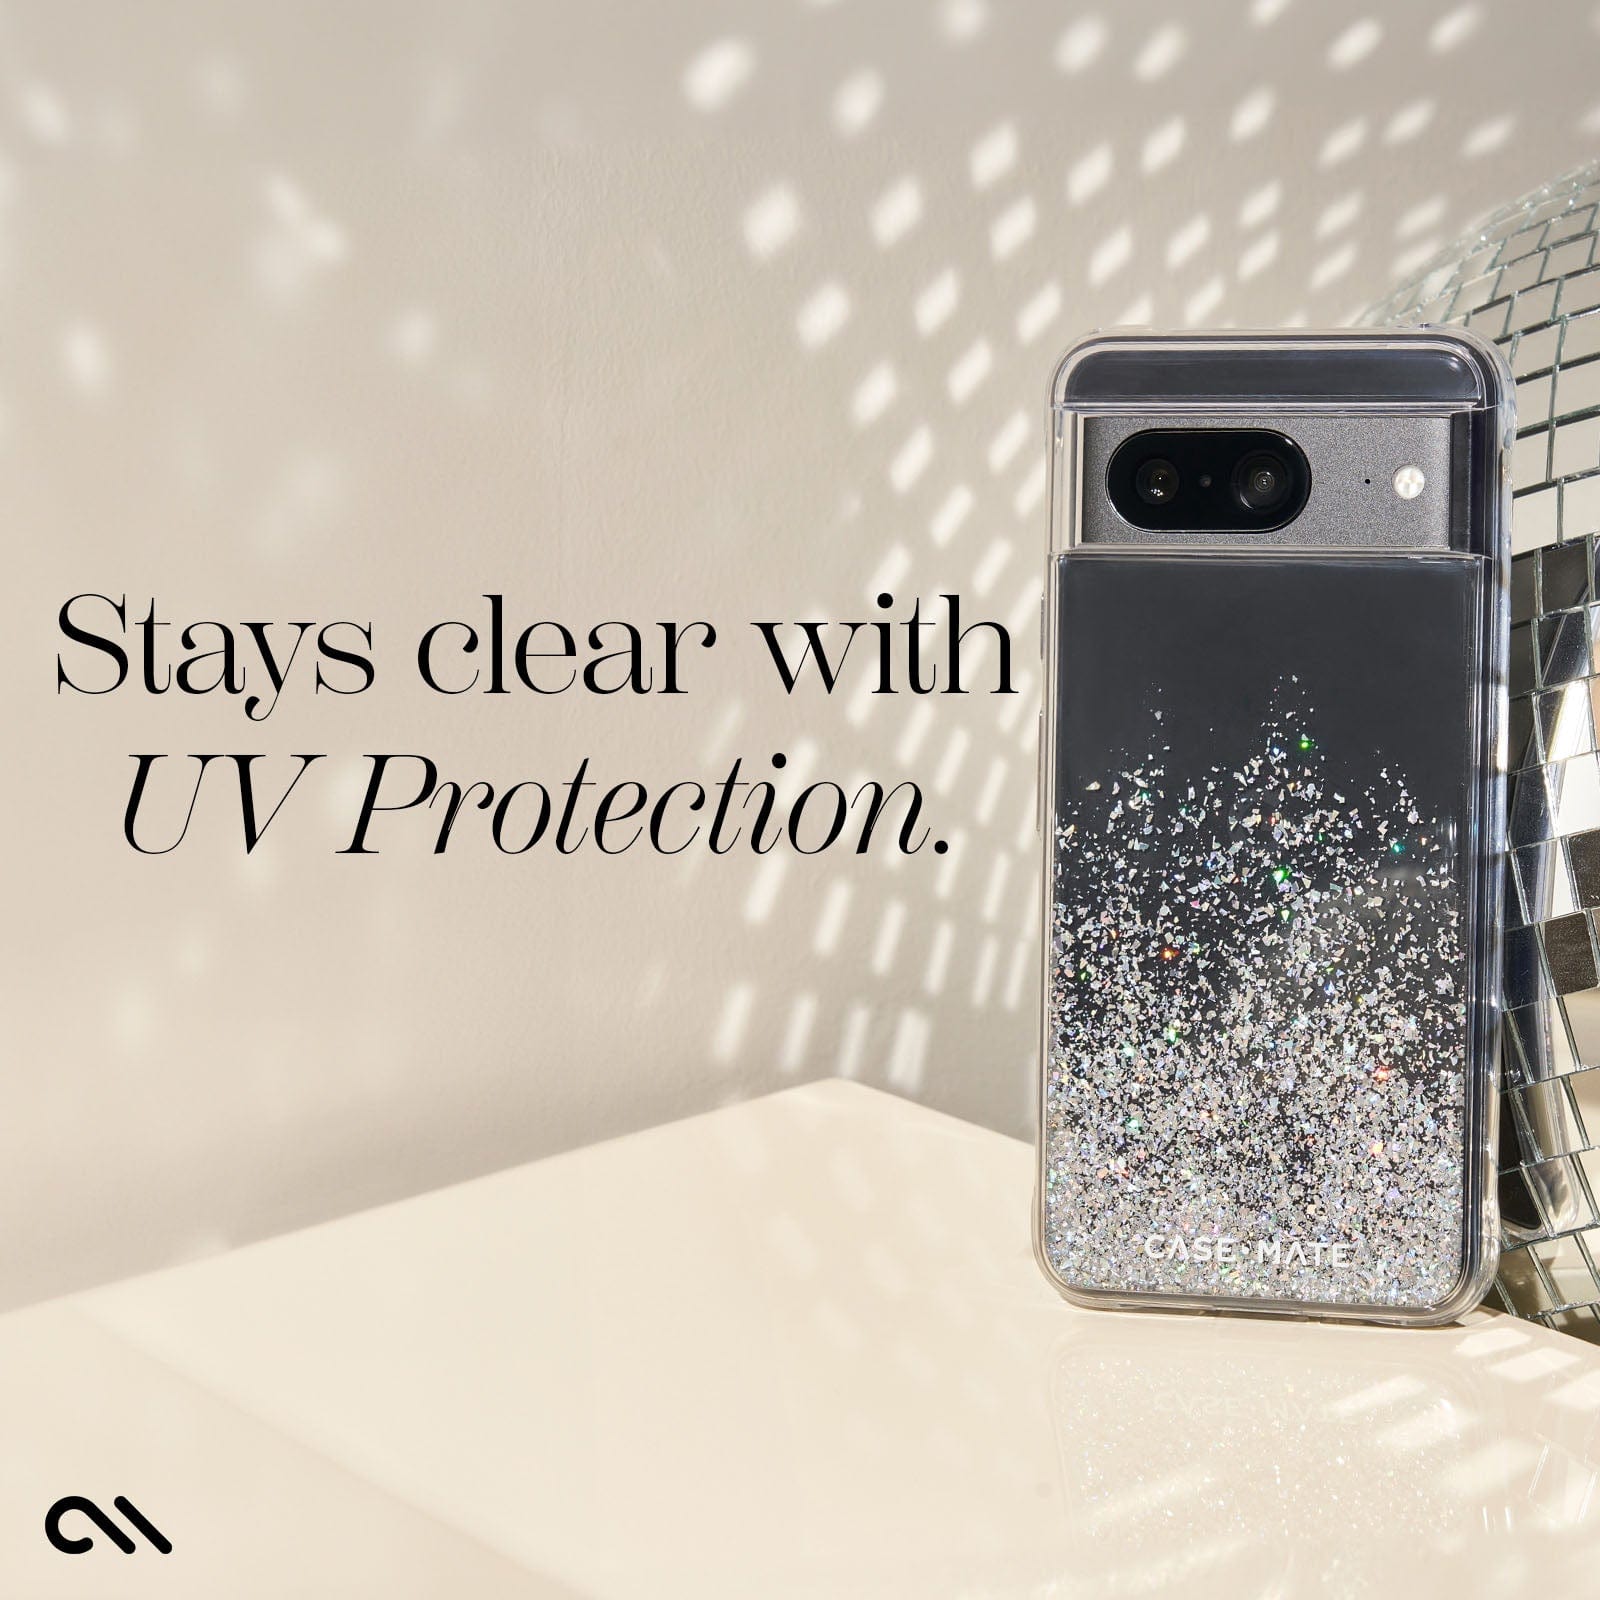 SAYS CLEAR WITH UV PROTECTION